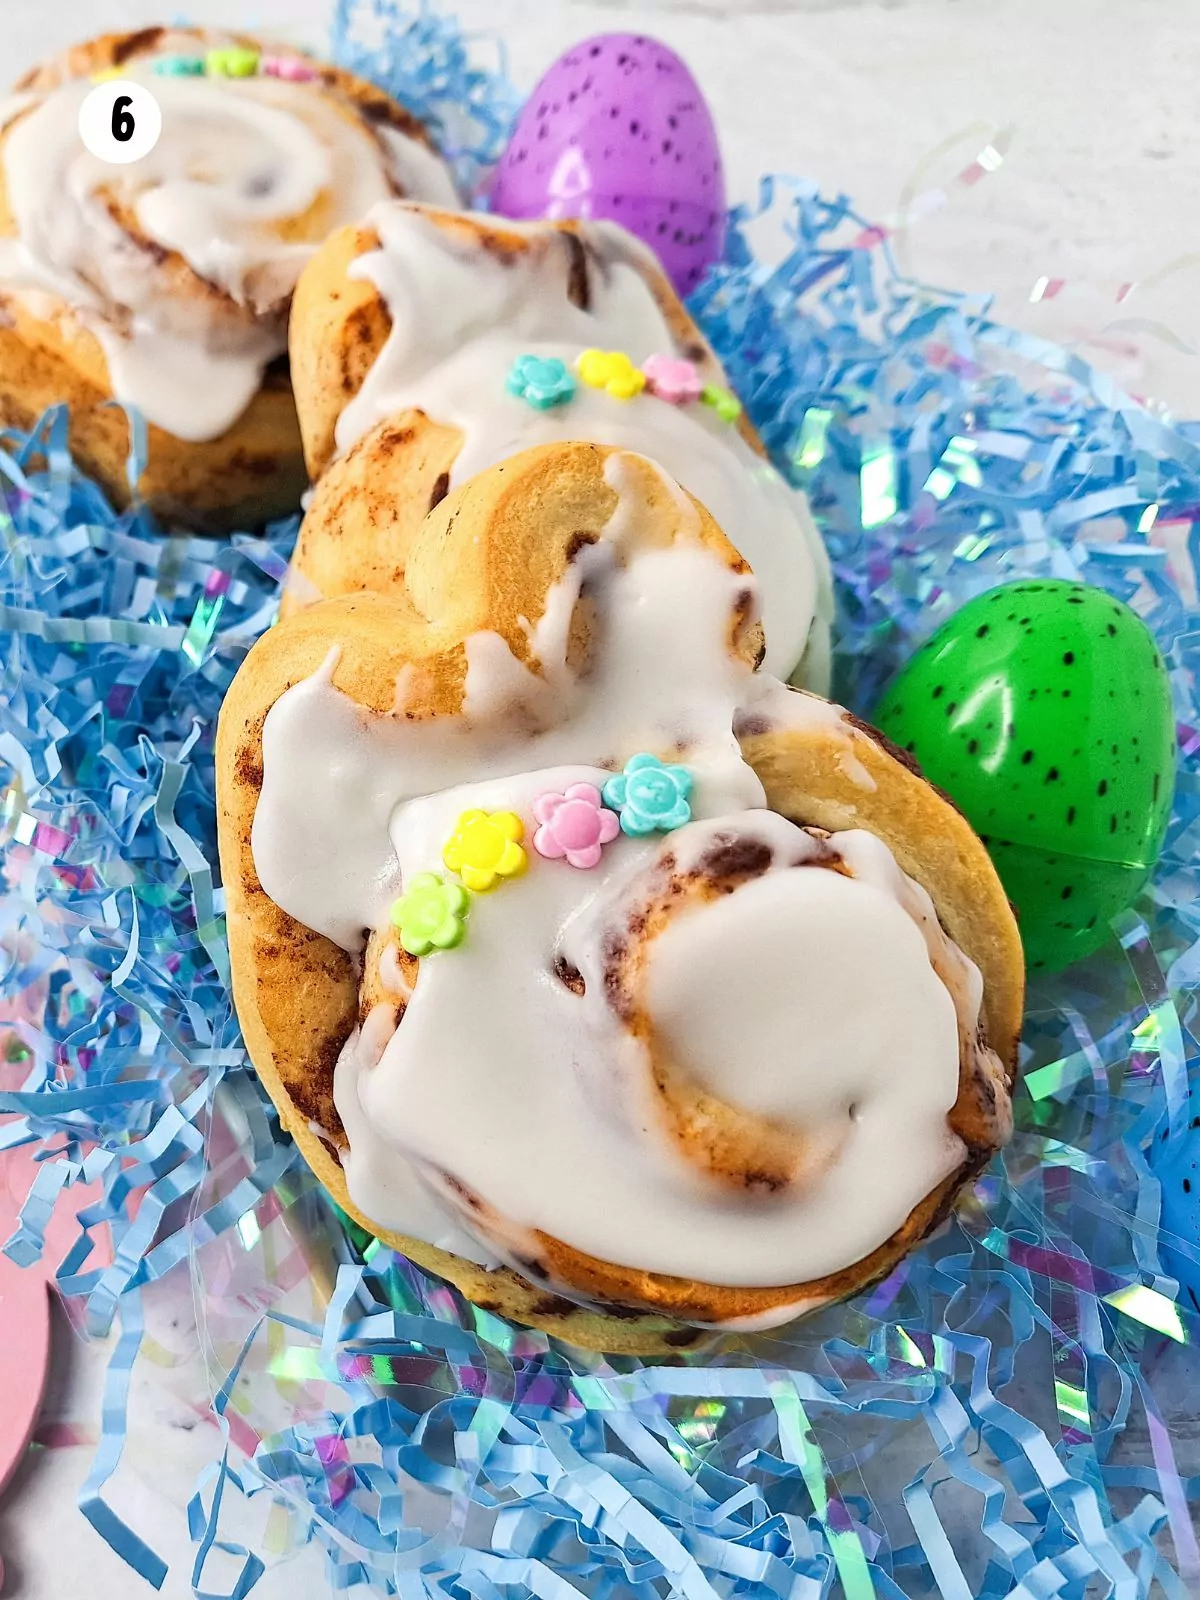 cinnamon rolls dressed up as bunnies on top of blue shredded paper.